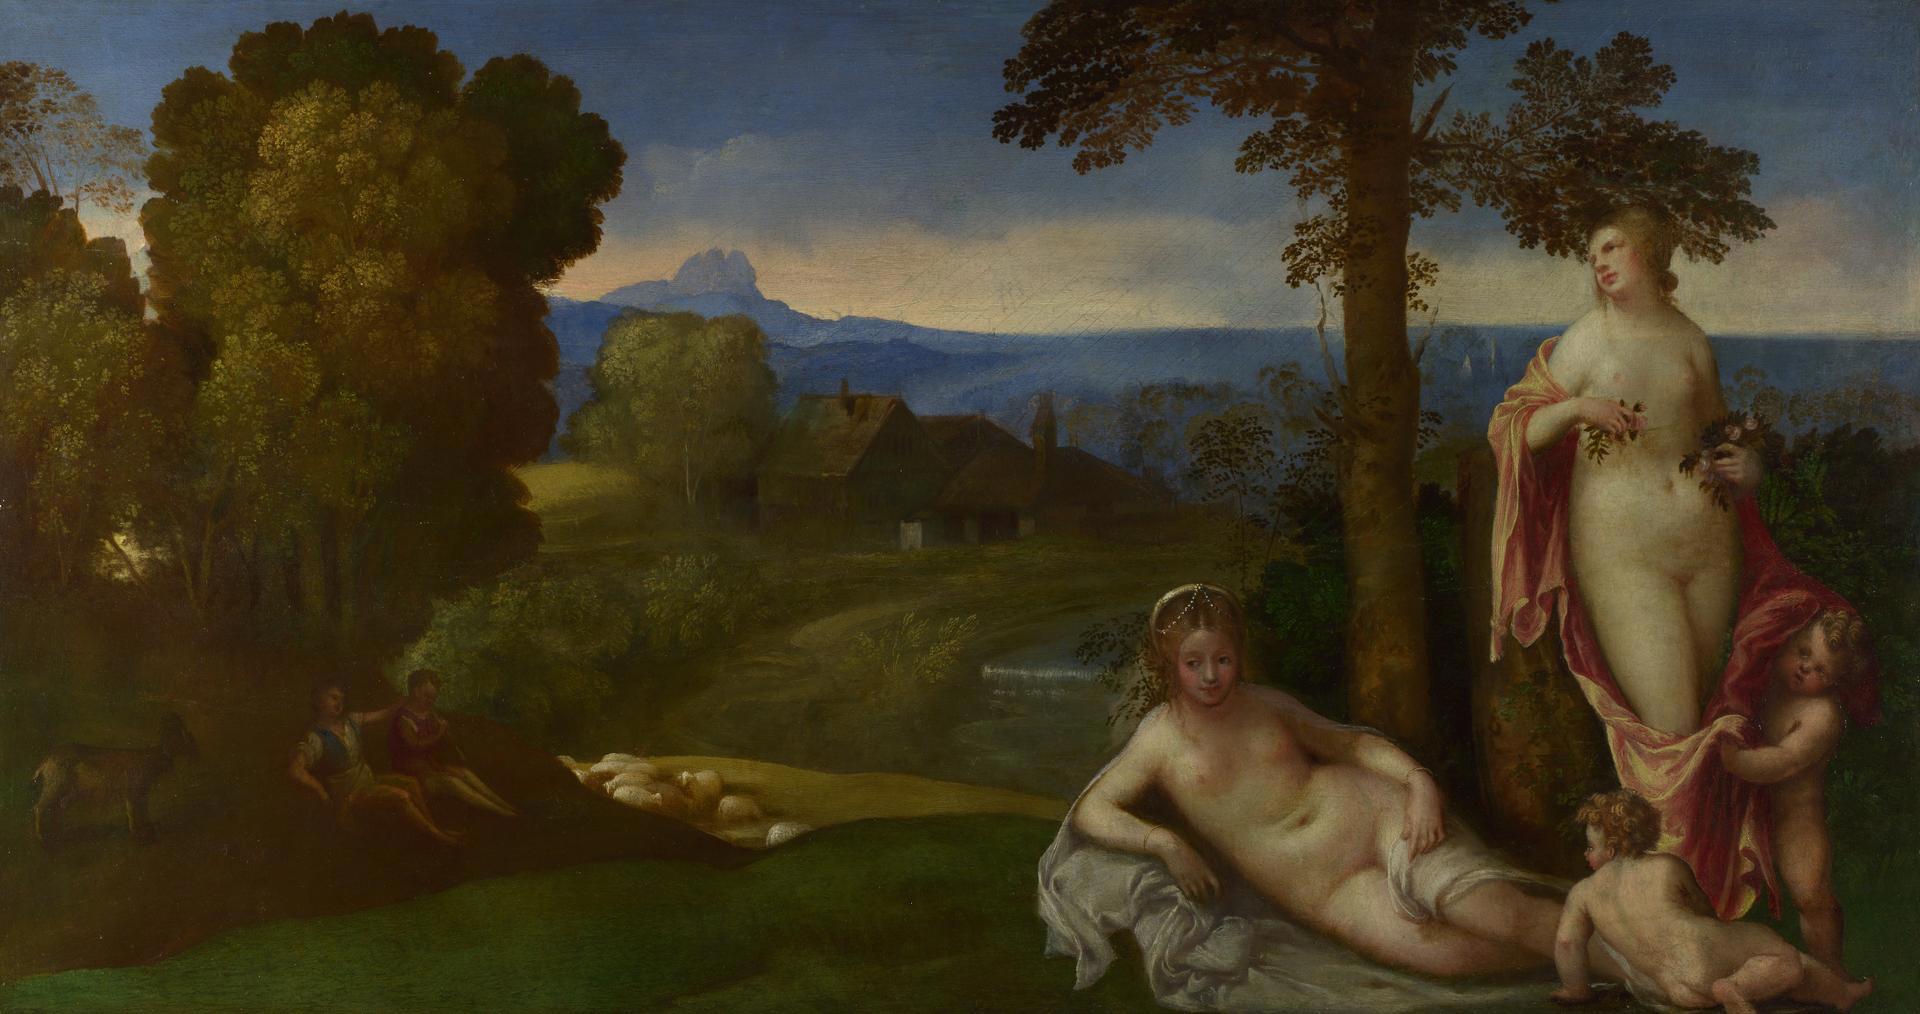 Nymphs and Children in a Landscape with Shepherds by Imitator of Giorgione